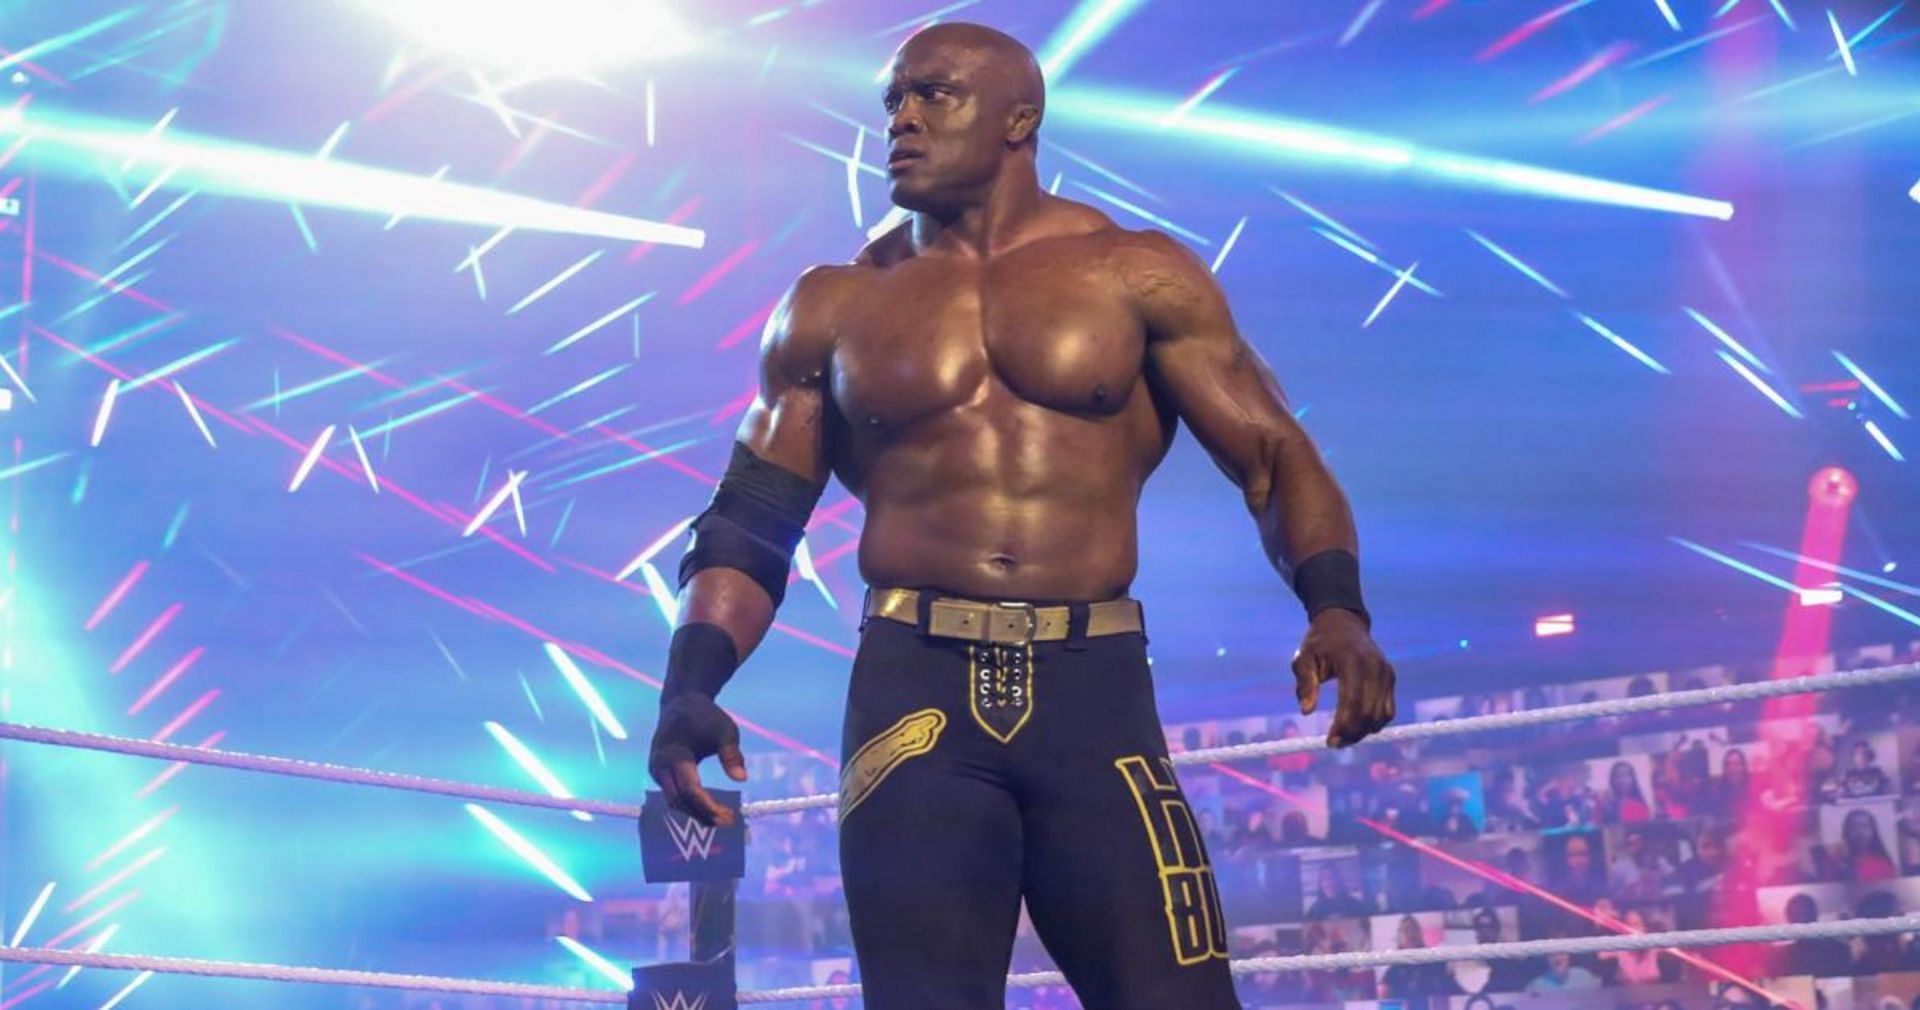 Bobby Lashley has a number of enemies in WWE